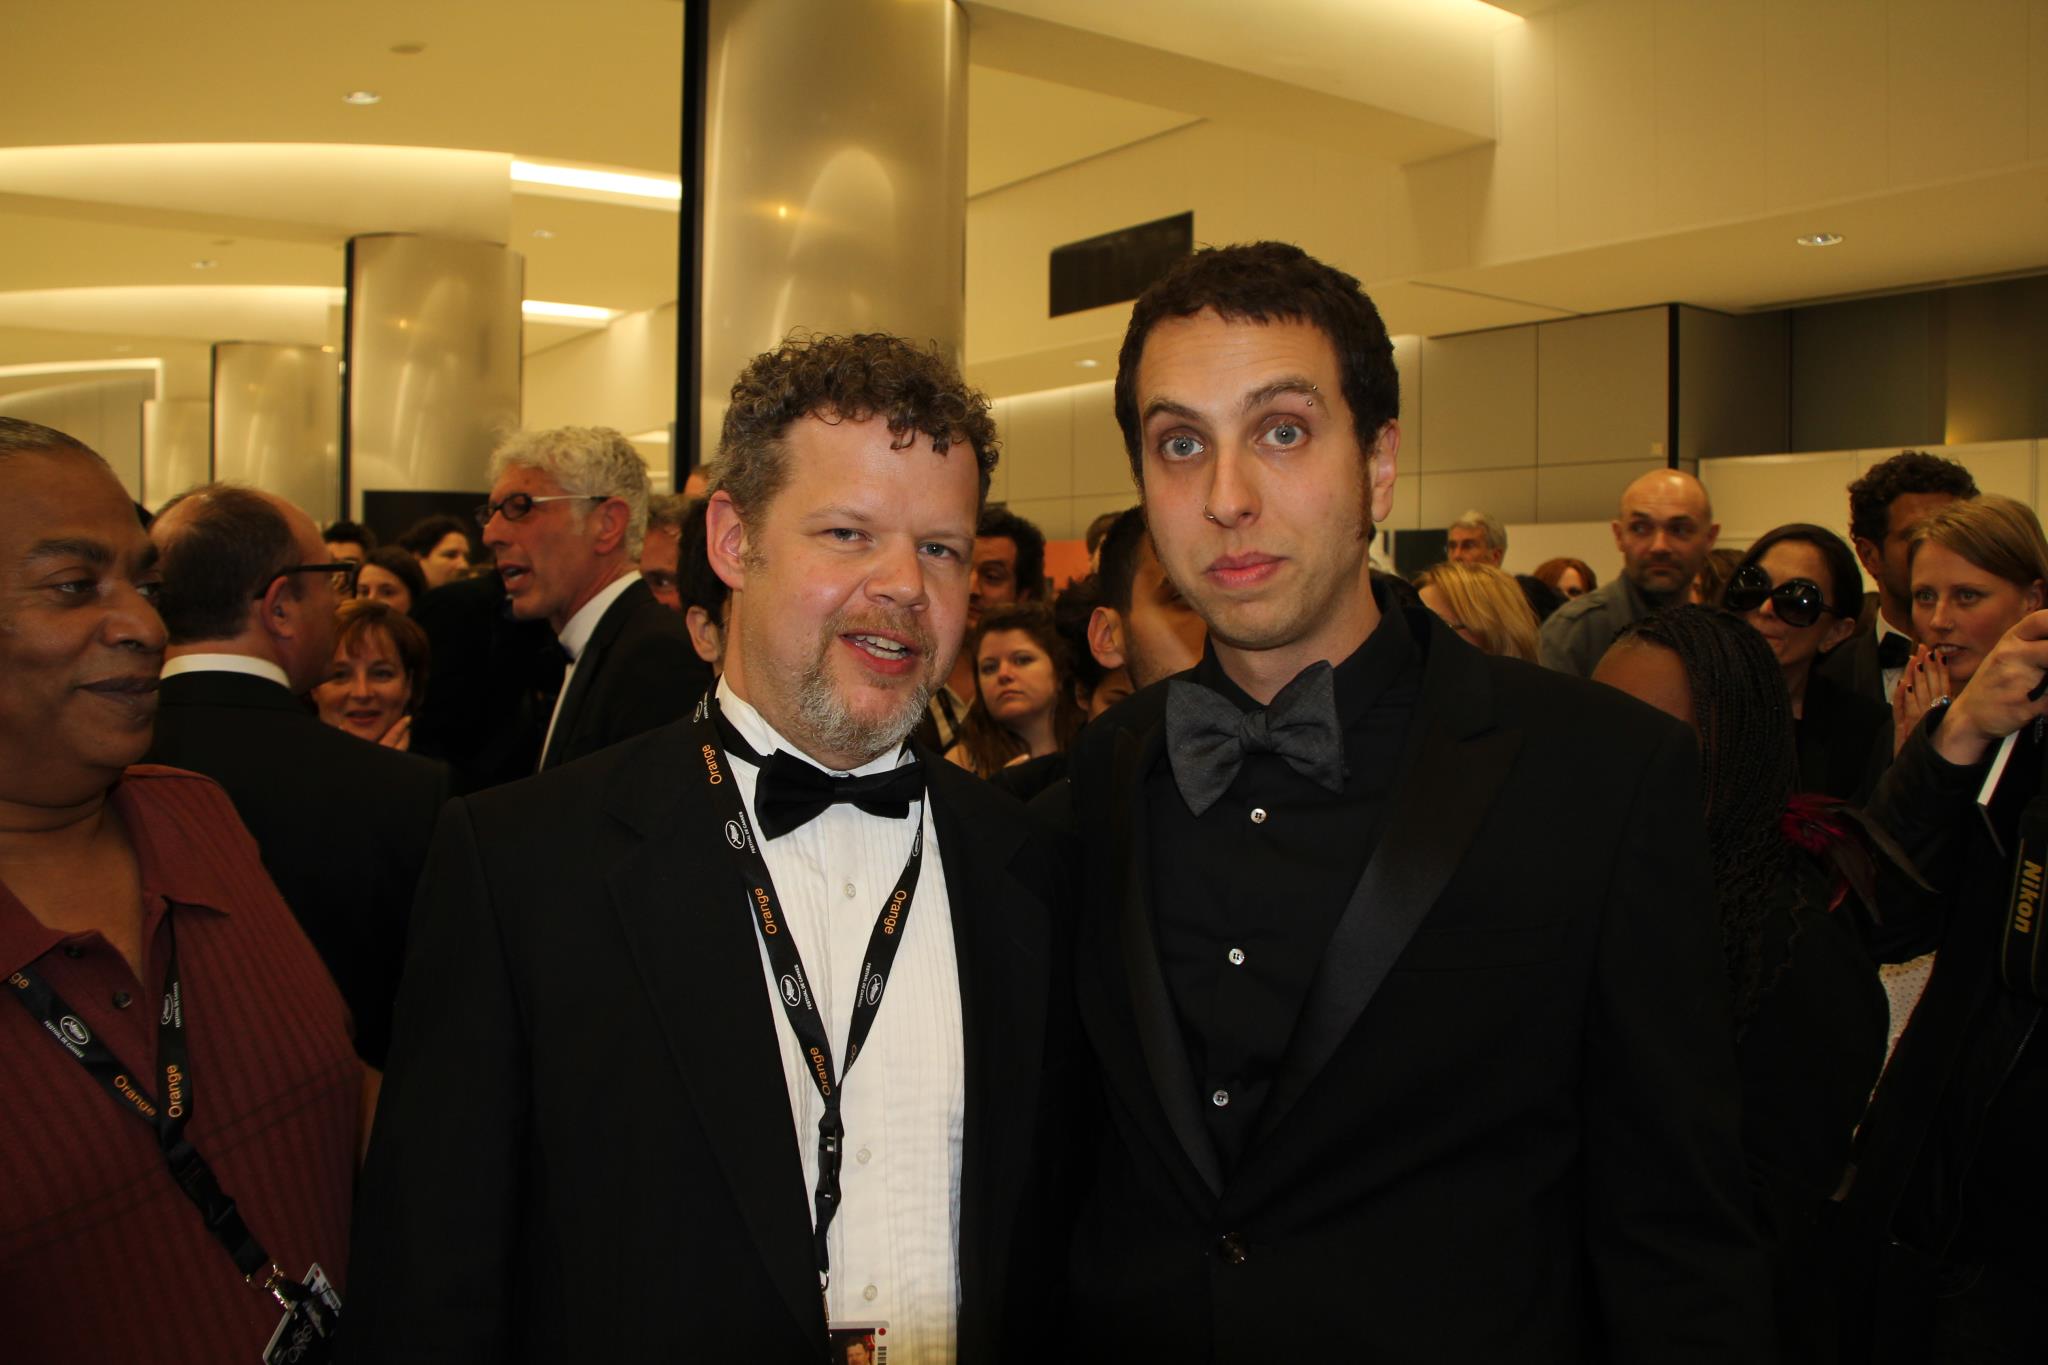 Chris Orchard and Brandon Cronenberg at the Cannes 2012 screening of 